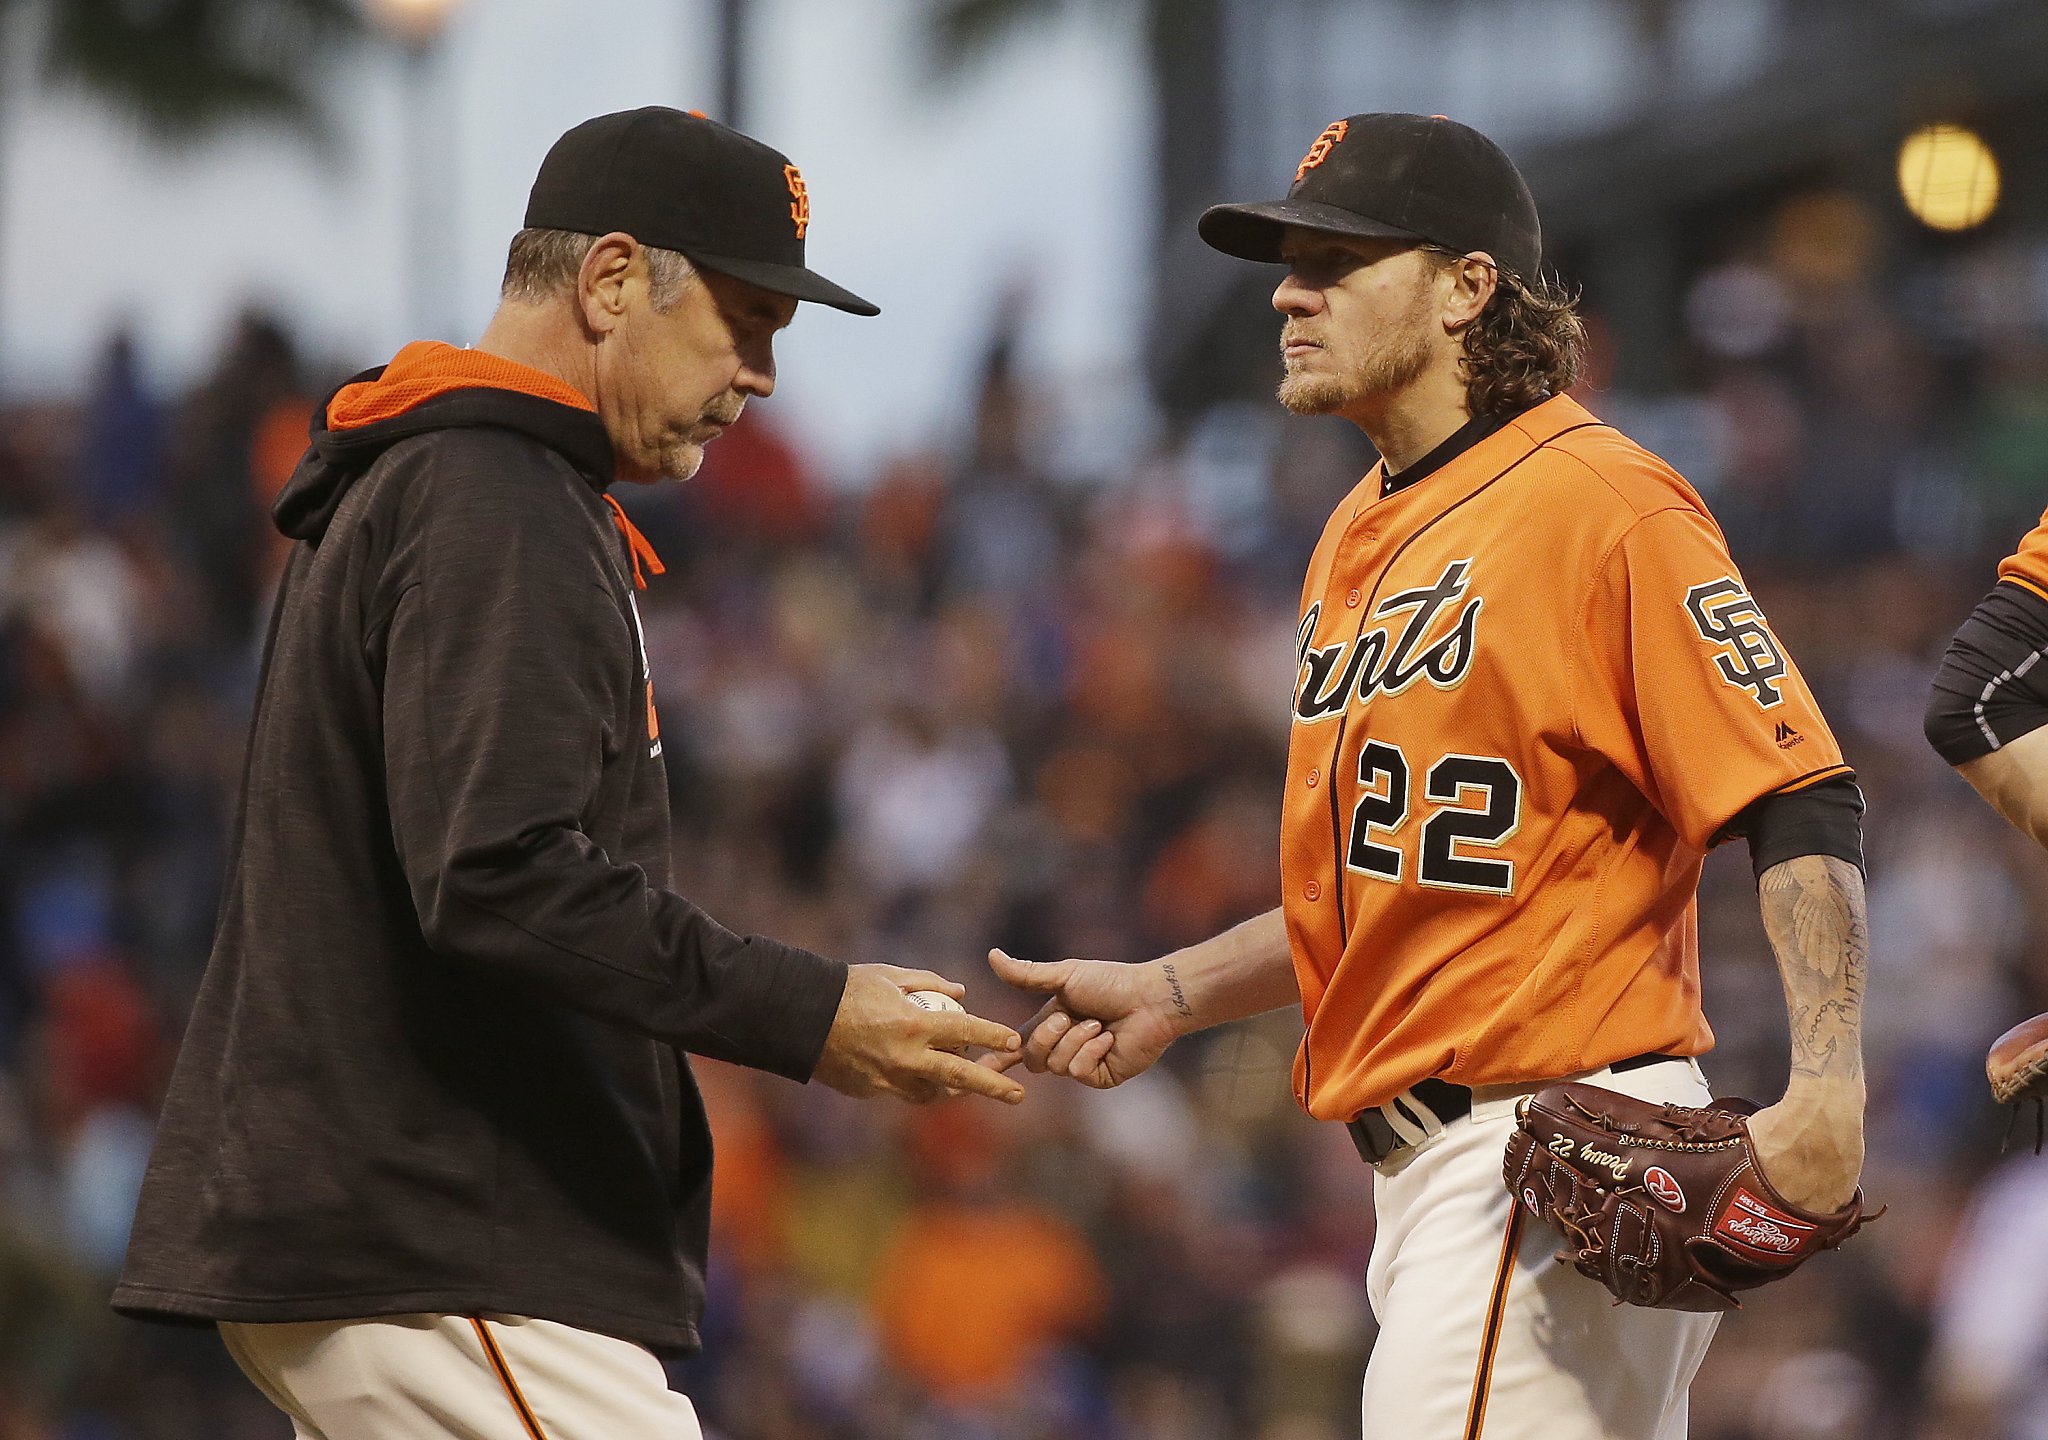 Ex-Giants pitcher Jake Peavy opens up about scam that robbed him